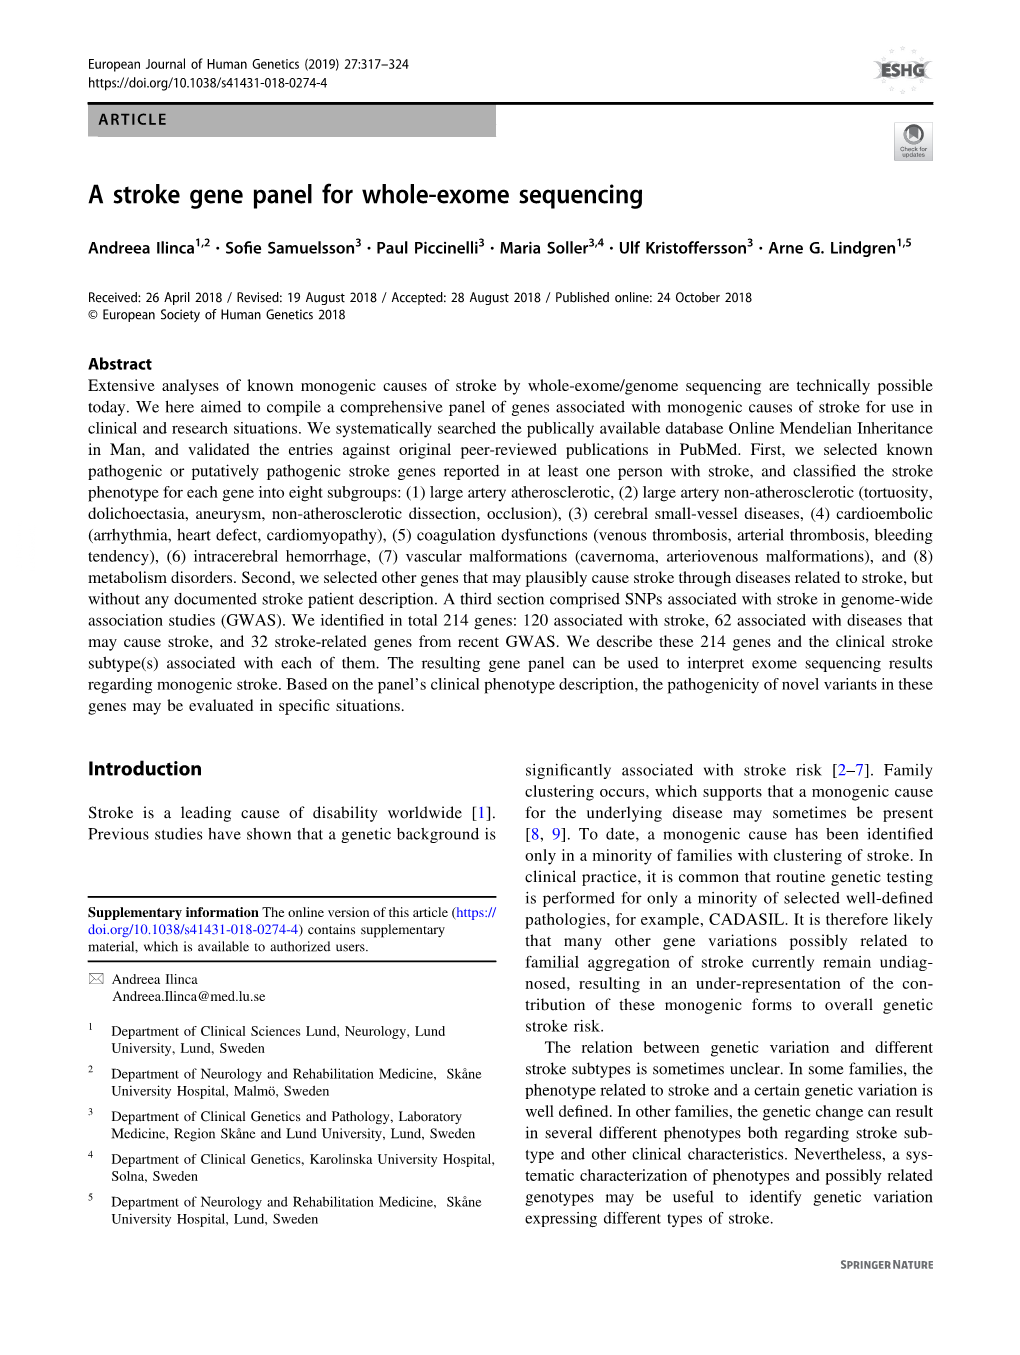 A Stroke Gene Panel for Whole-Exome Sequencing